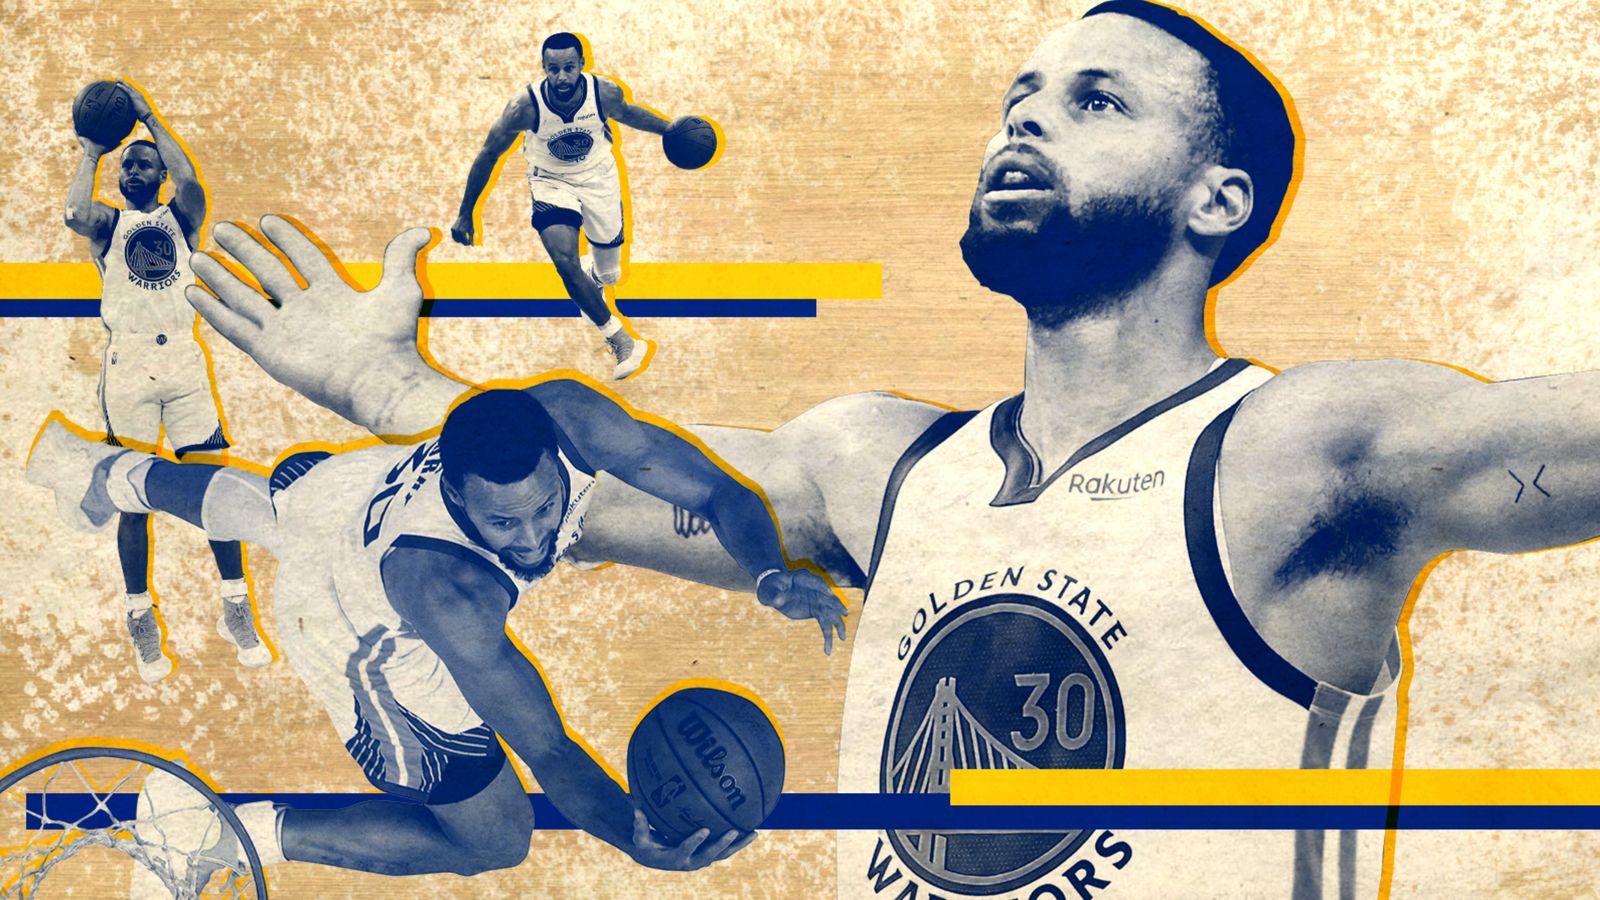 Warriors' Latest Struggle How Stephen Curry's Resilience Is Teaching the Team to Rise Again